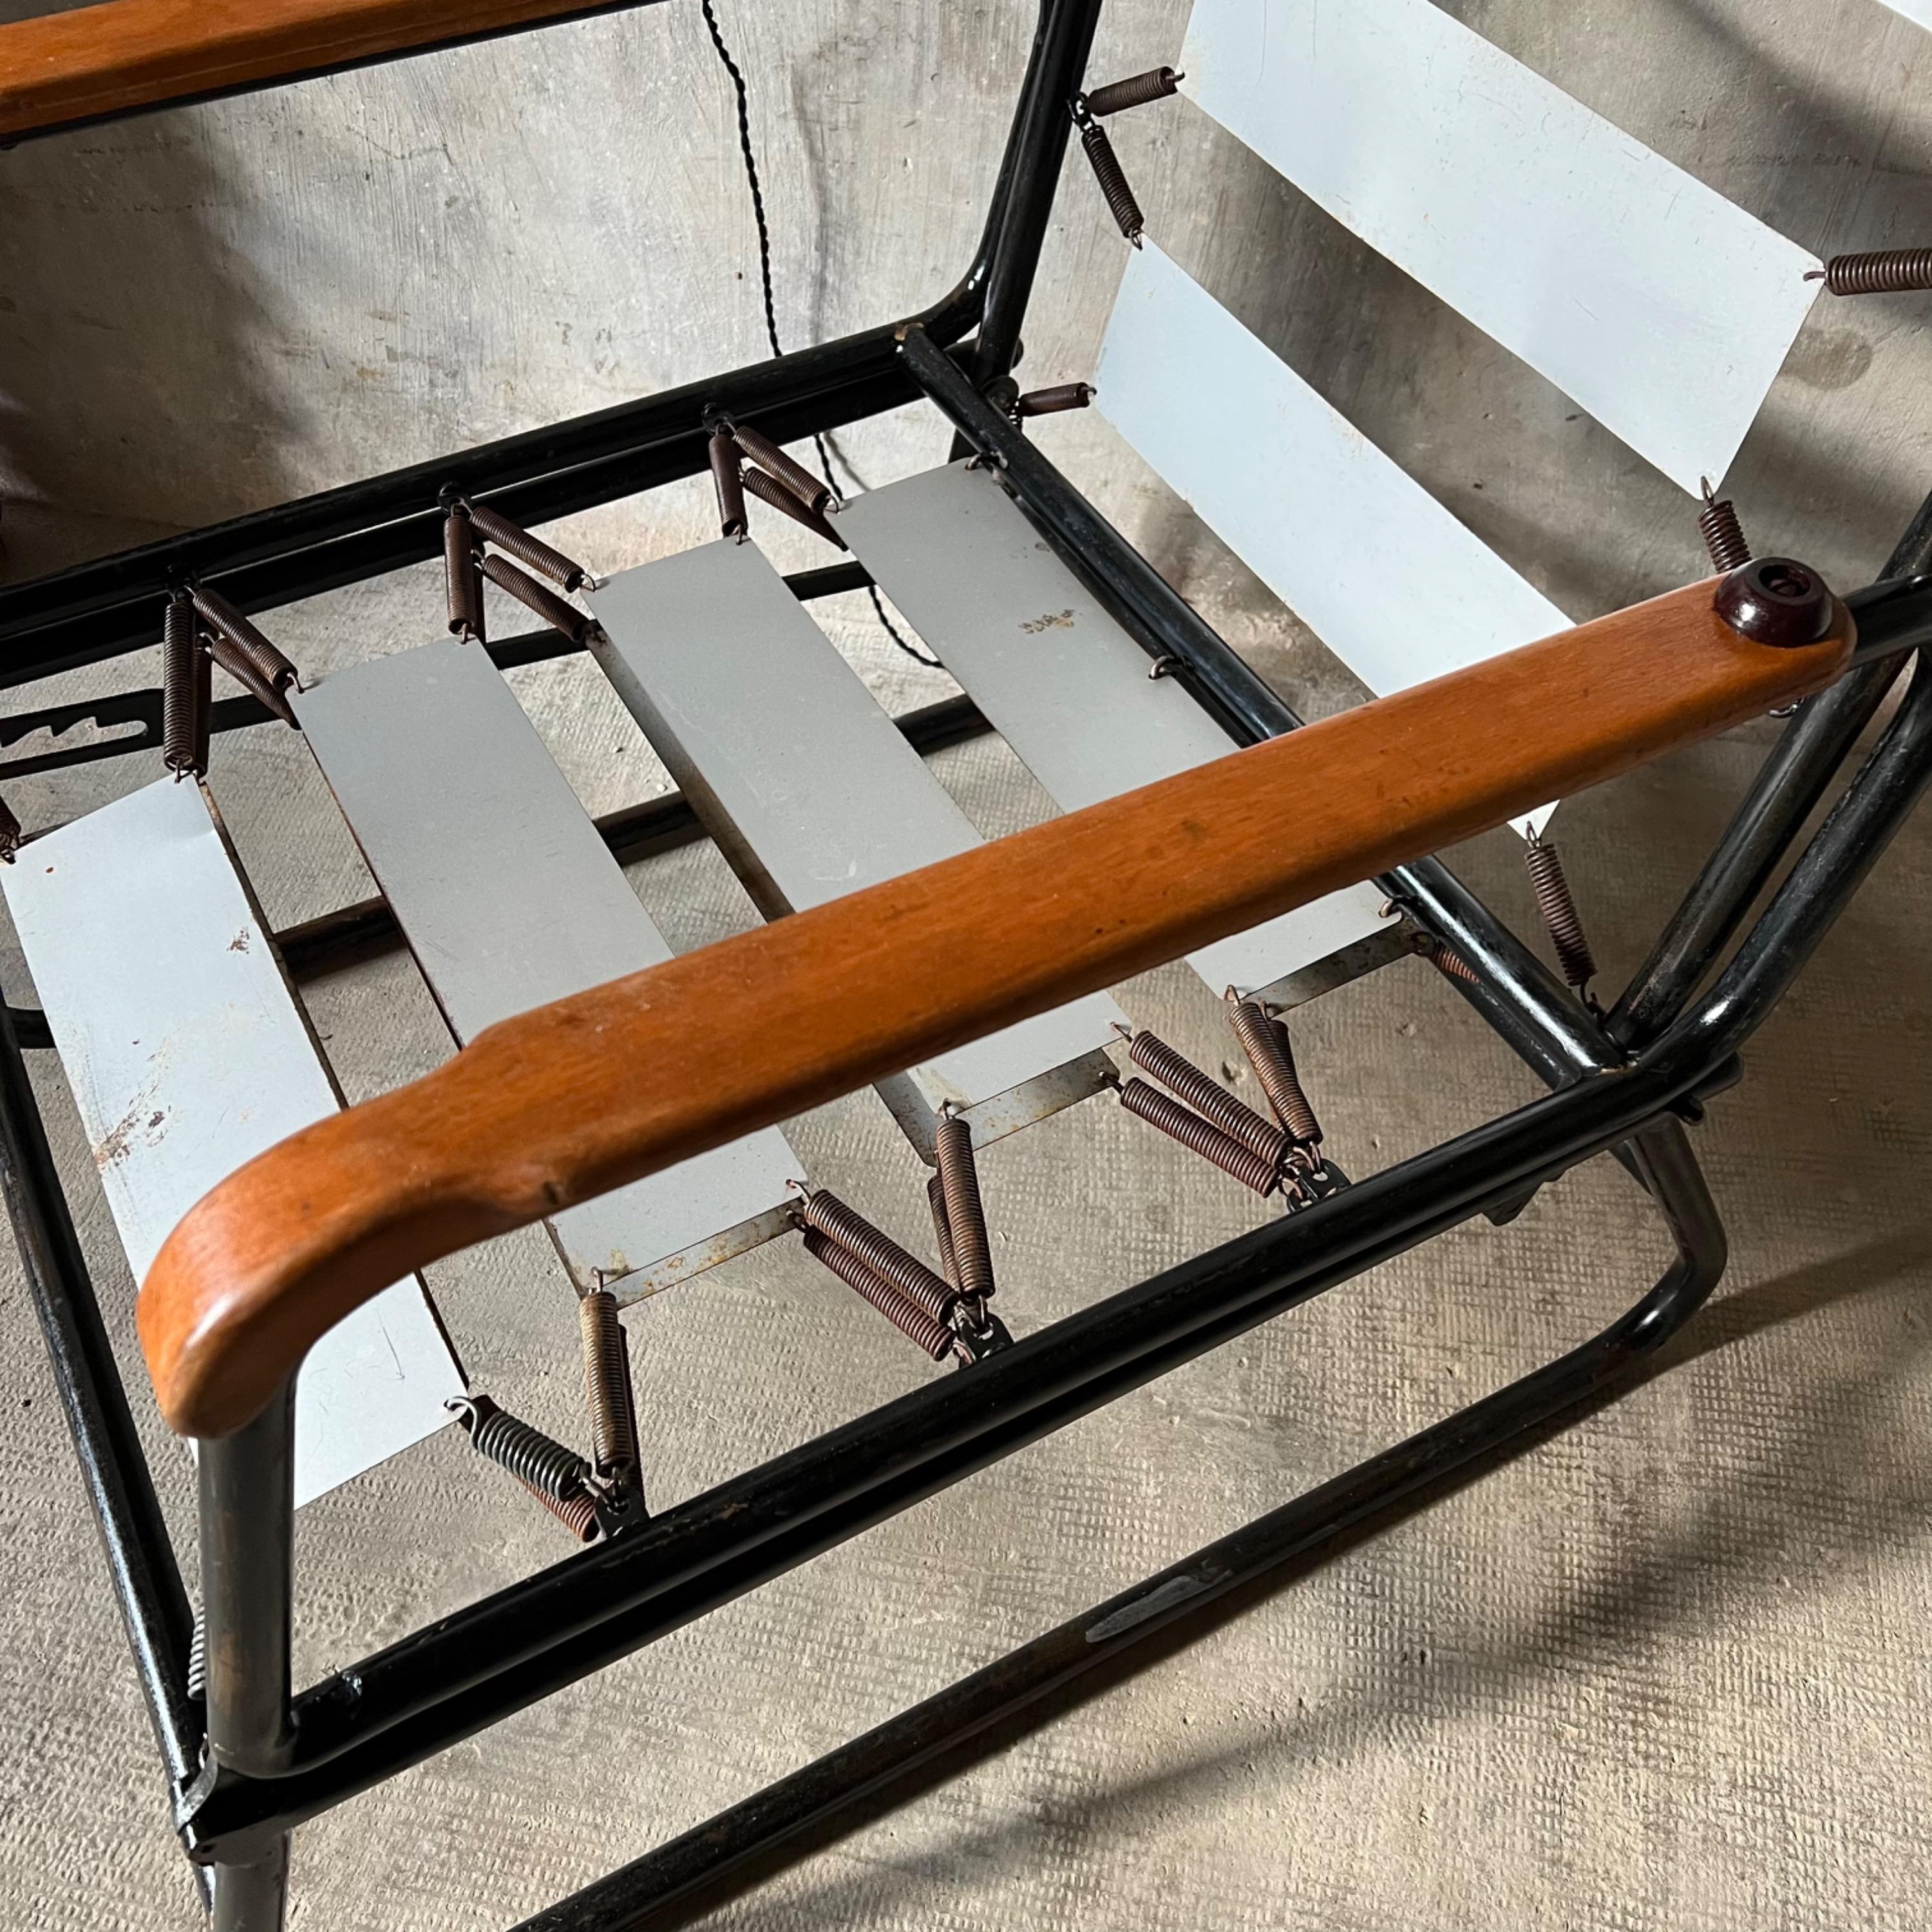 Rare Modernist Convertible & Fully Adjustable Amrchair by Francois Caruelle, France 1950. New Cushions coming up